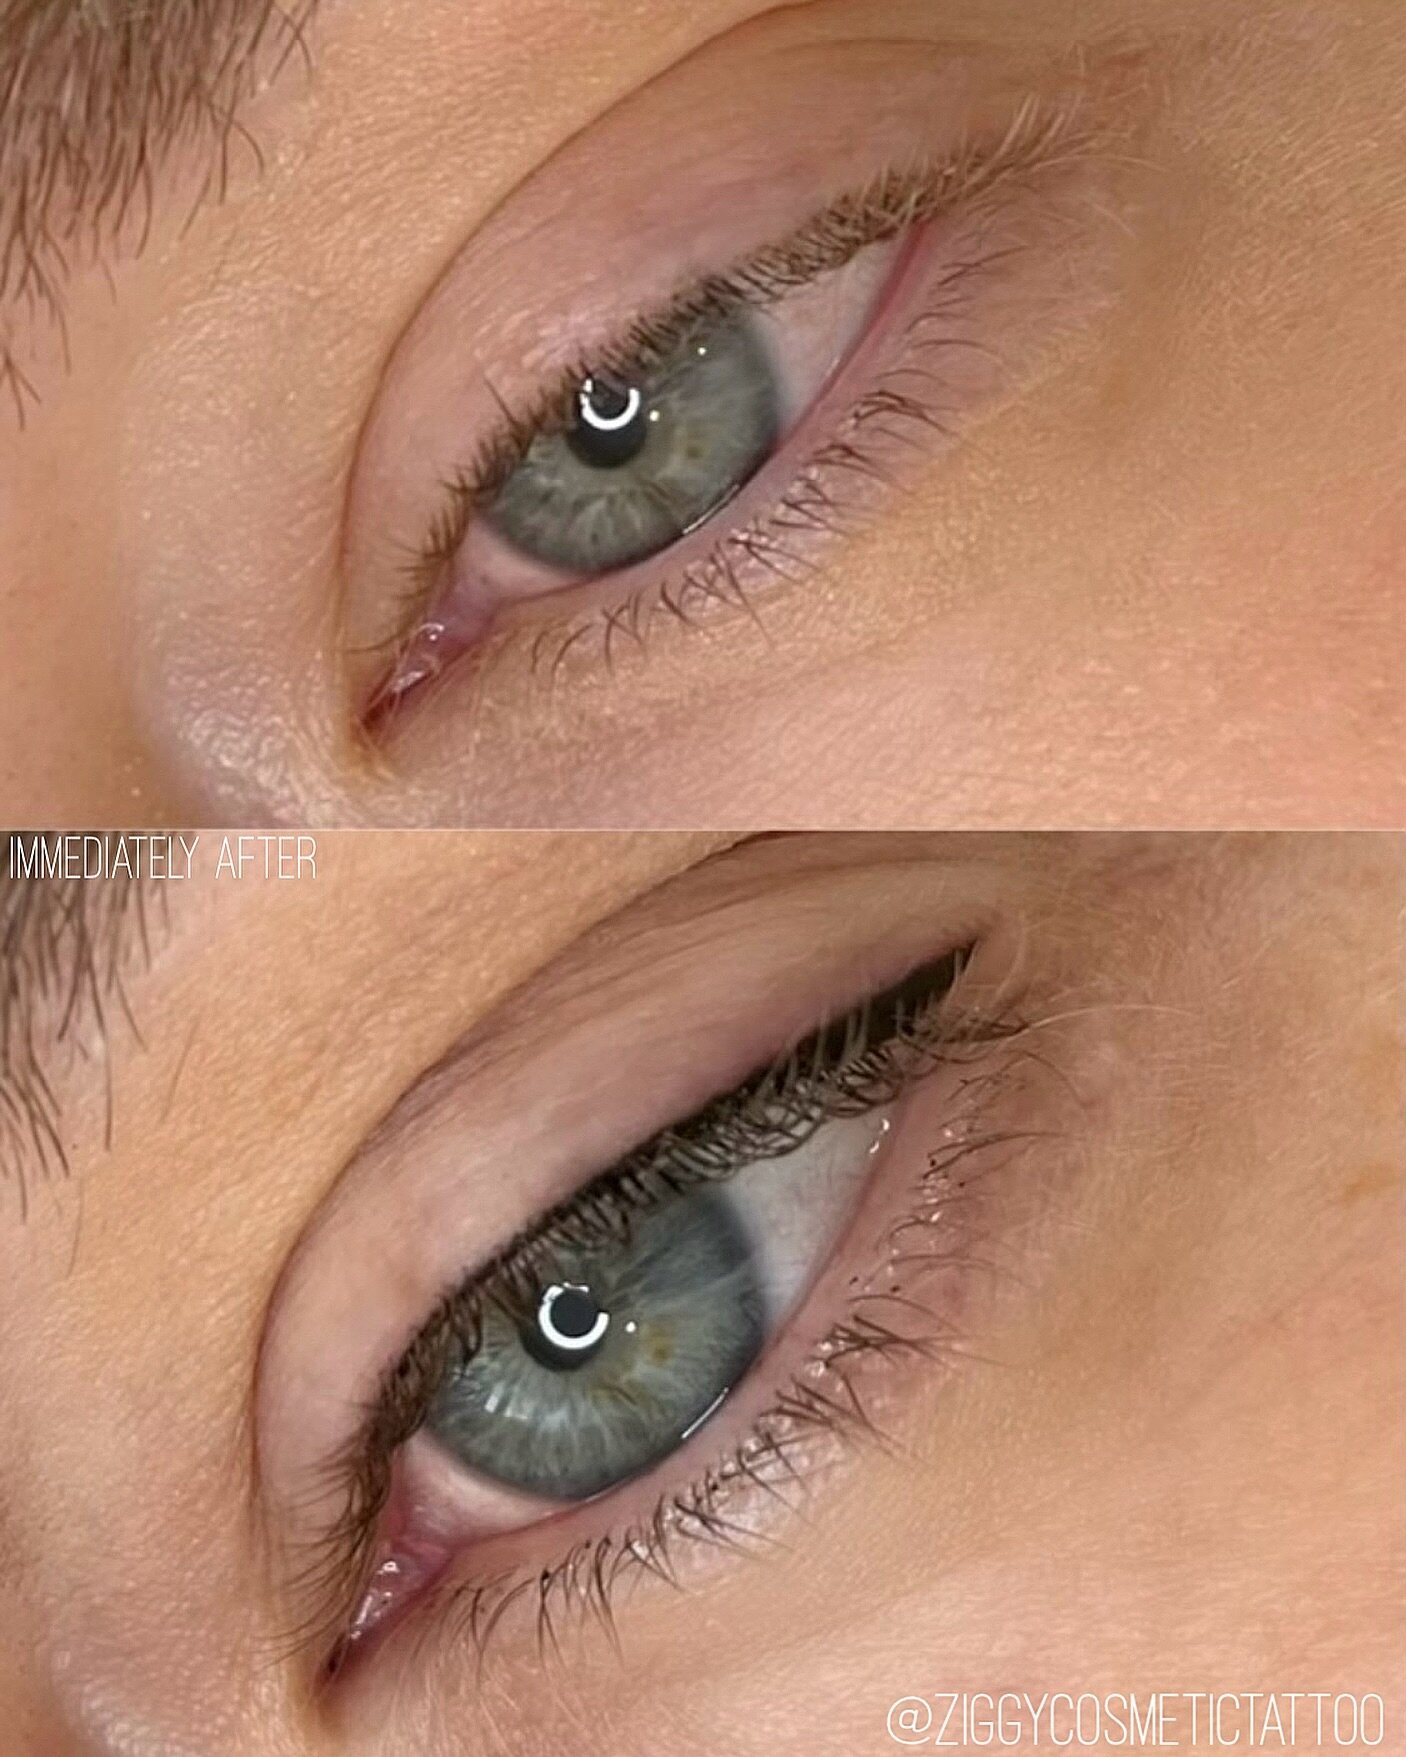 before + immediately after eyeliner tattooing 🖊️ by Jess @ziggycosmetictattoo

Each liner is 100% customised to the wearer after a thorough consultation + designing process (not to mention, with a gal with over 10+ years in makeup and permanent make